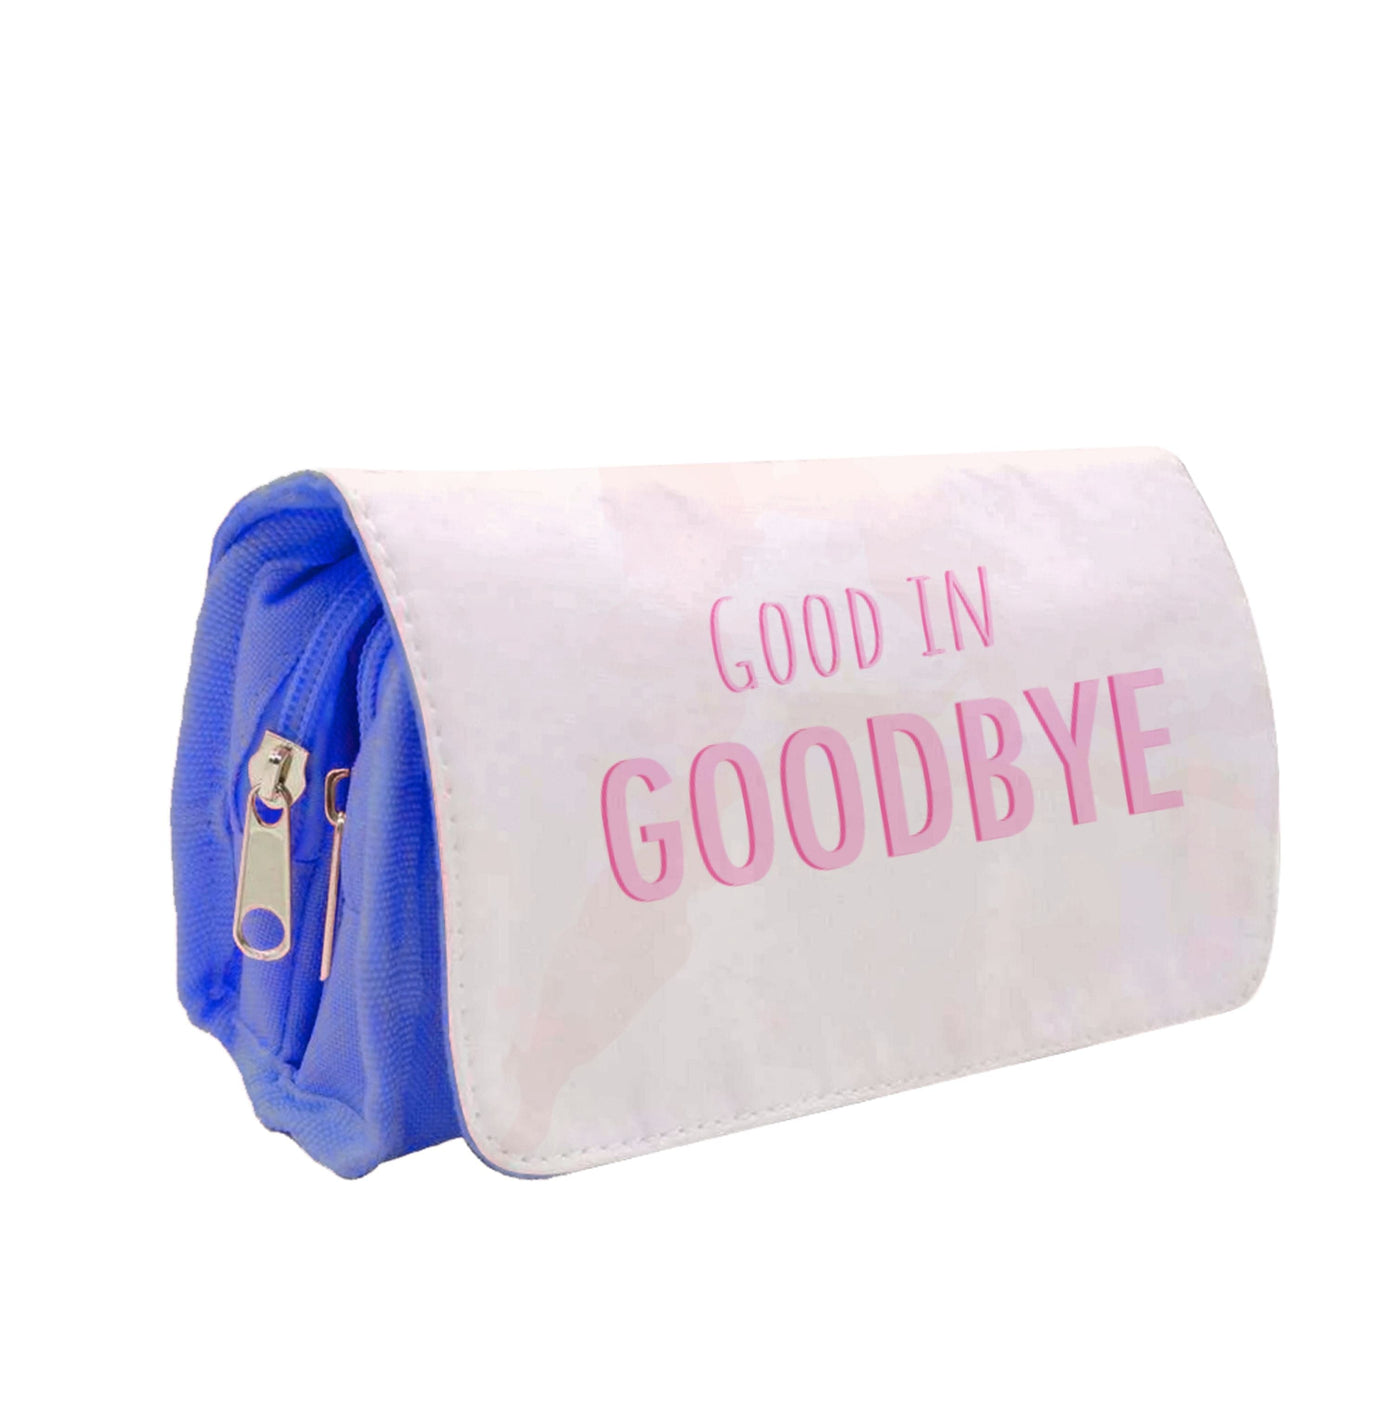 Good In Goodbye - Maddison Beer Pencil Case